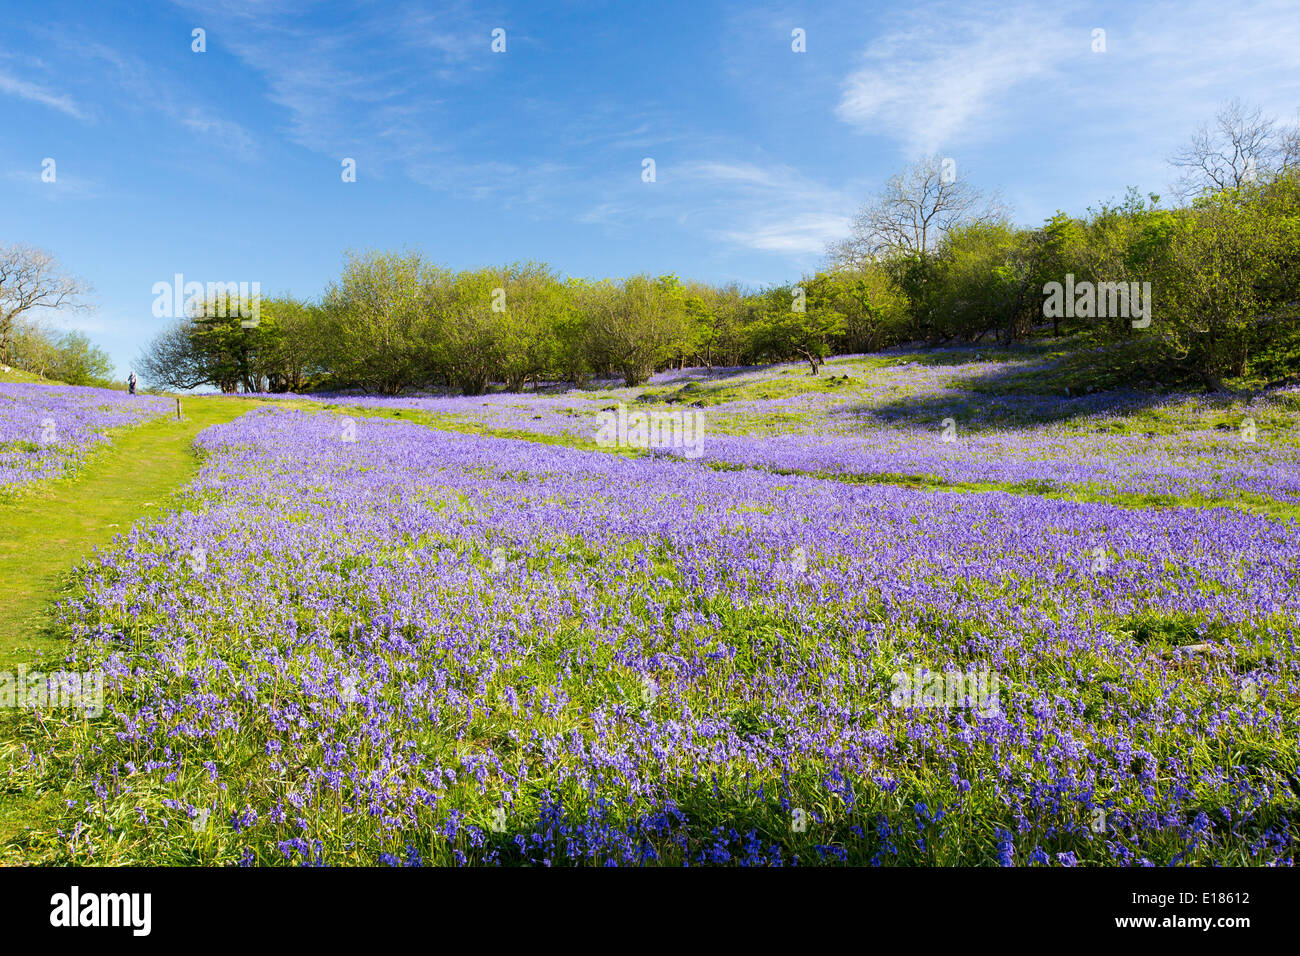 Bluebells and Hazel coppicing growing on a limestone hill in the Yorkshire Dales National Park, UK. Stock Photo